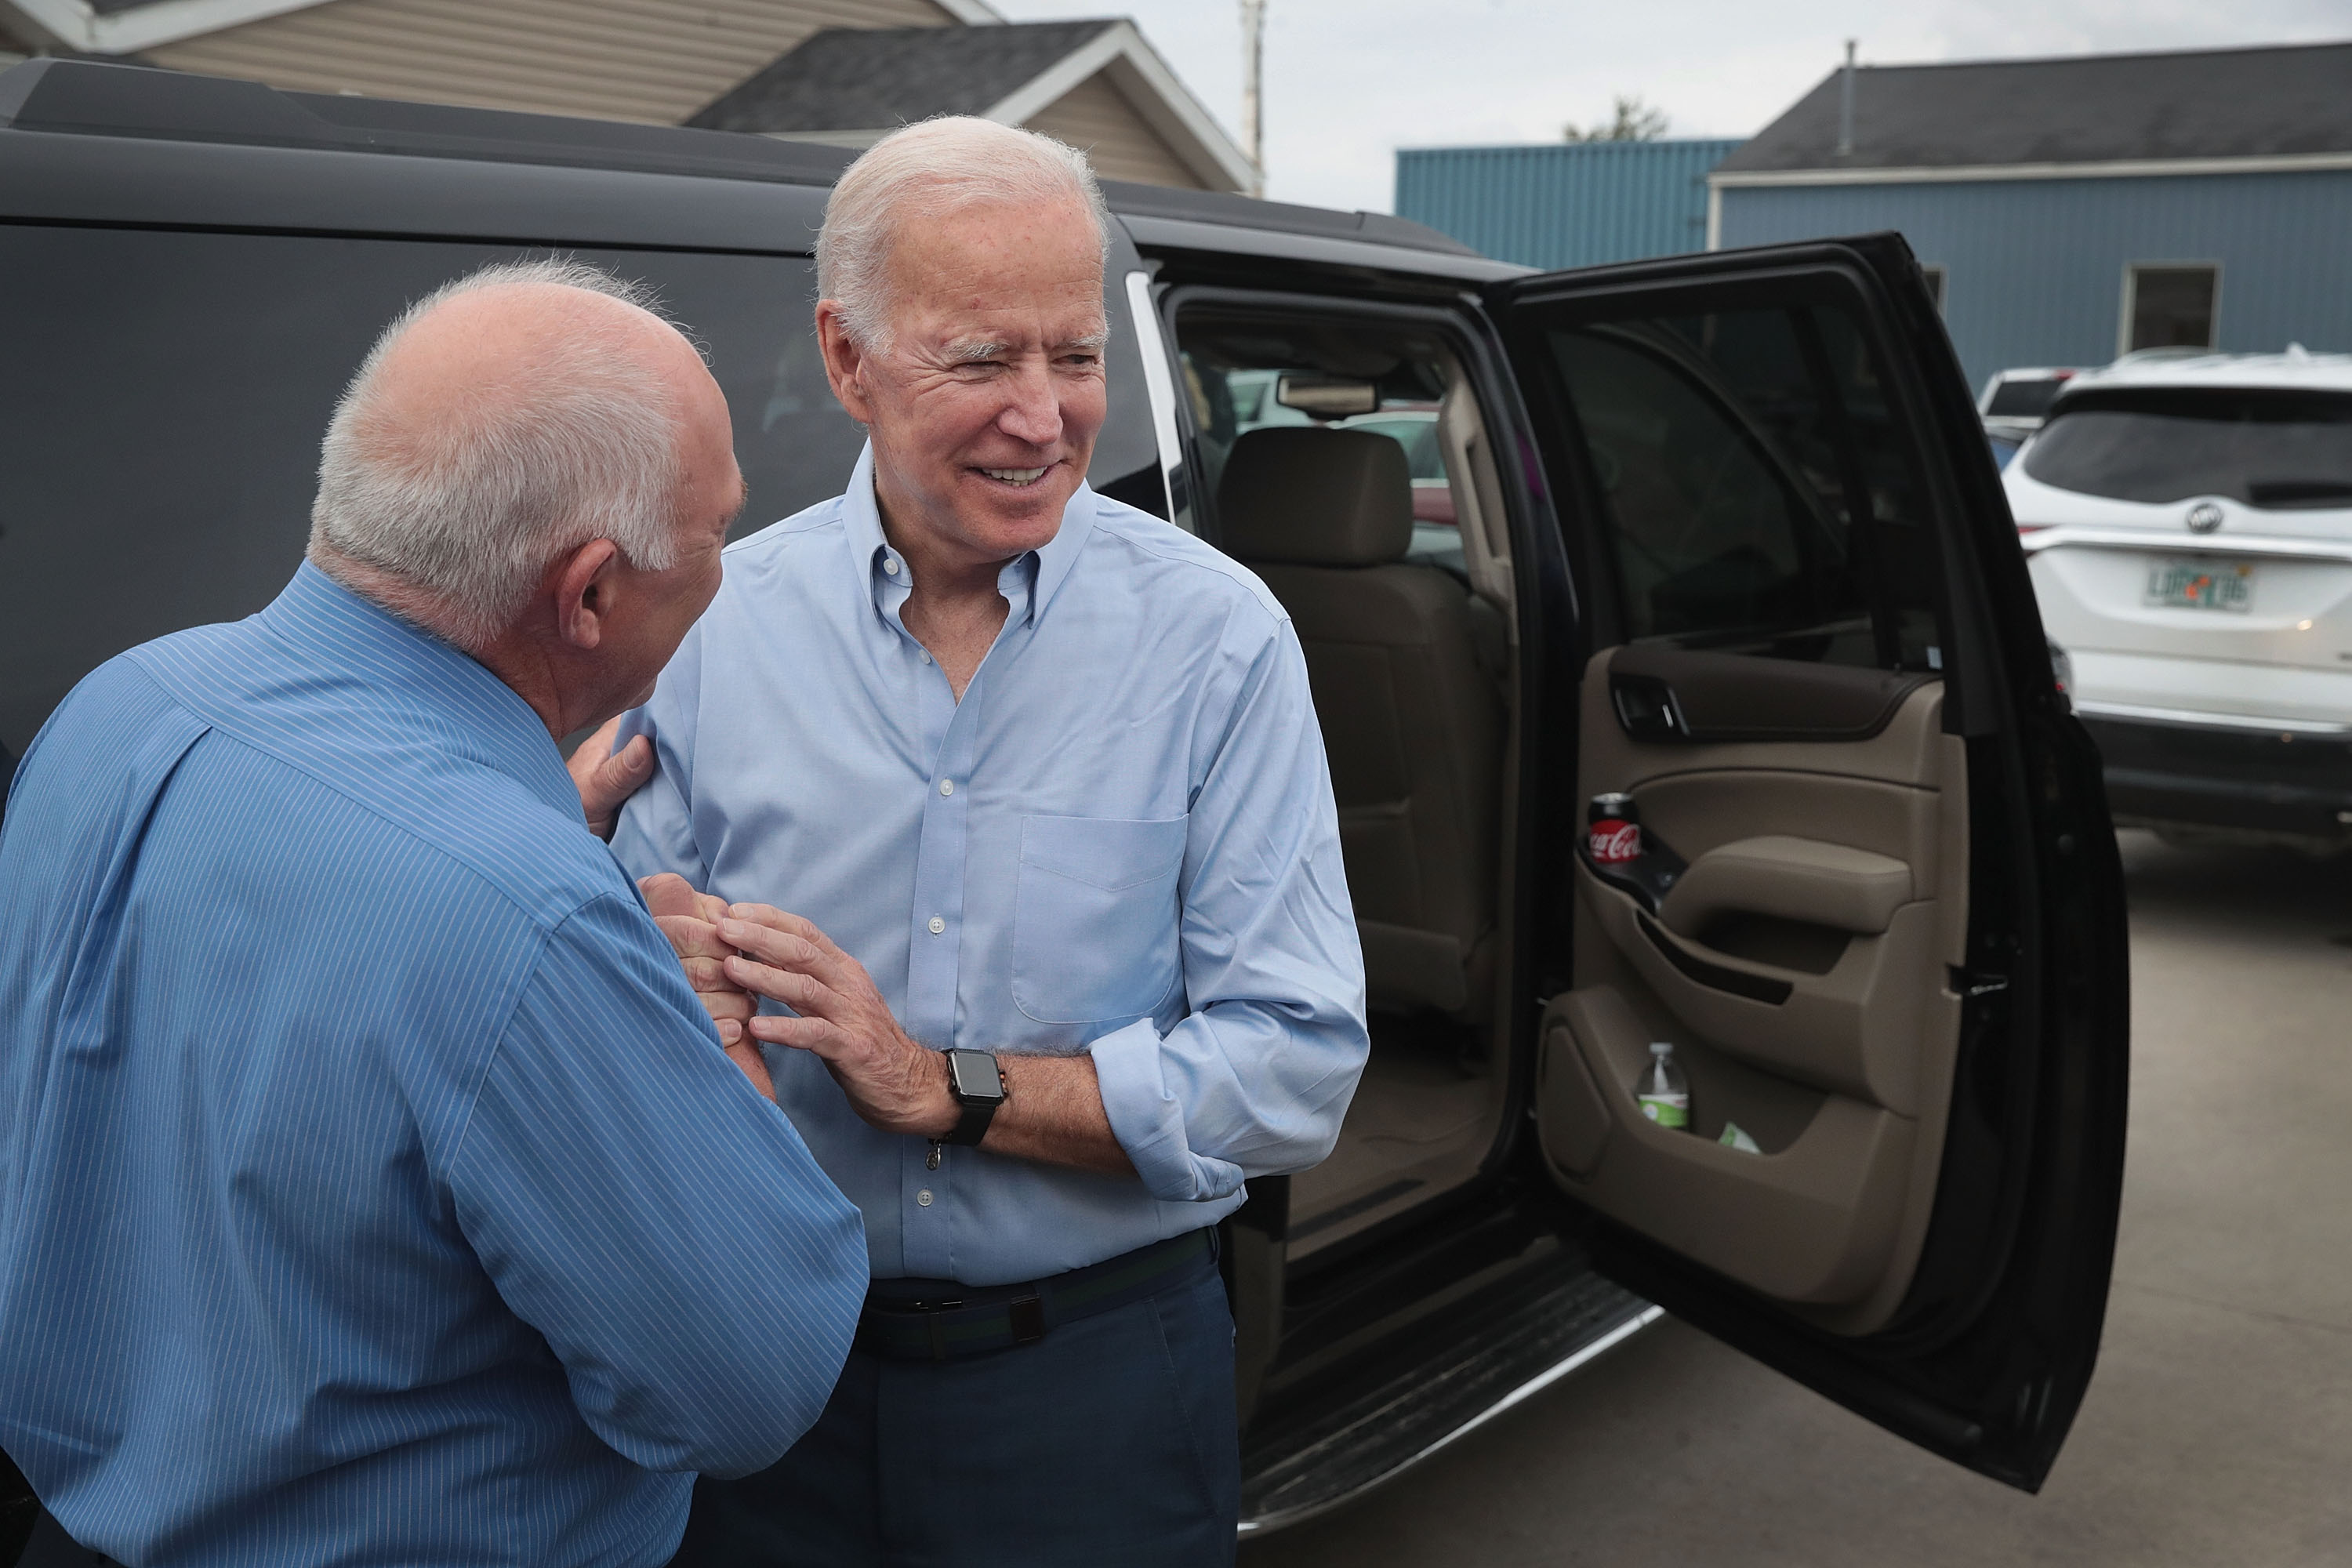 ELDRIDGE, IOWA - JUNE 12: Democratic presidential candidate and former U.S. vice president Joe Biden chats with Mayor Marty O'Boyle outside of the Tasty Cafe following a quick campaign stop at the restaurant on June 12, 2019 in Eldridge, Iowa. The stop was part of a two-day visit to campaign in the state. (Photo by Scott Olson/Getty Images)